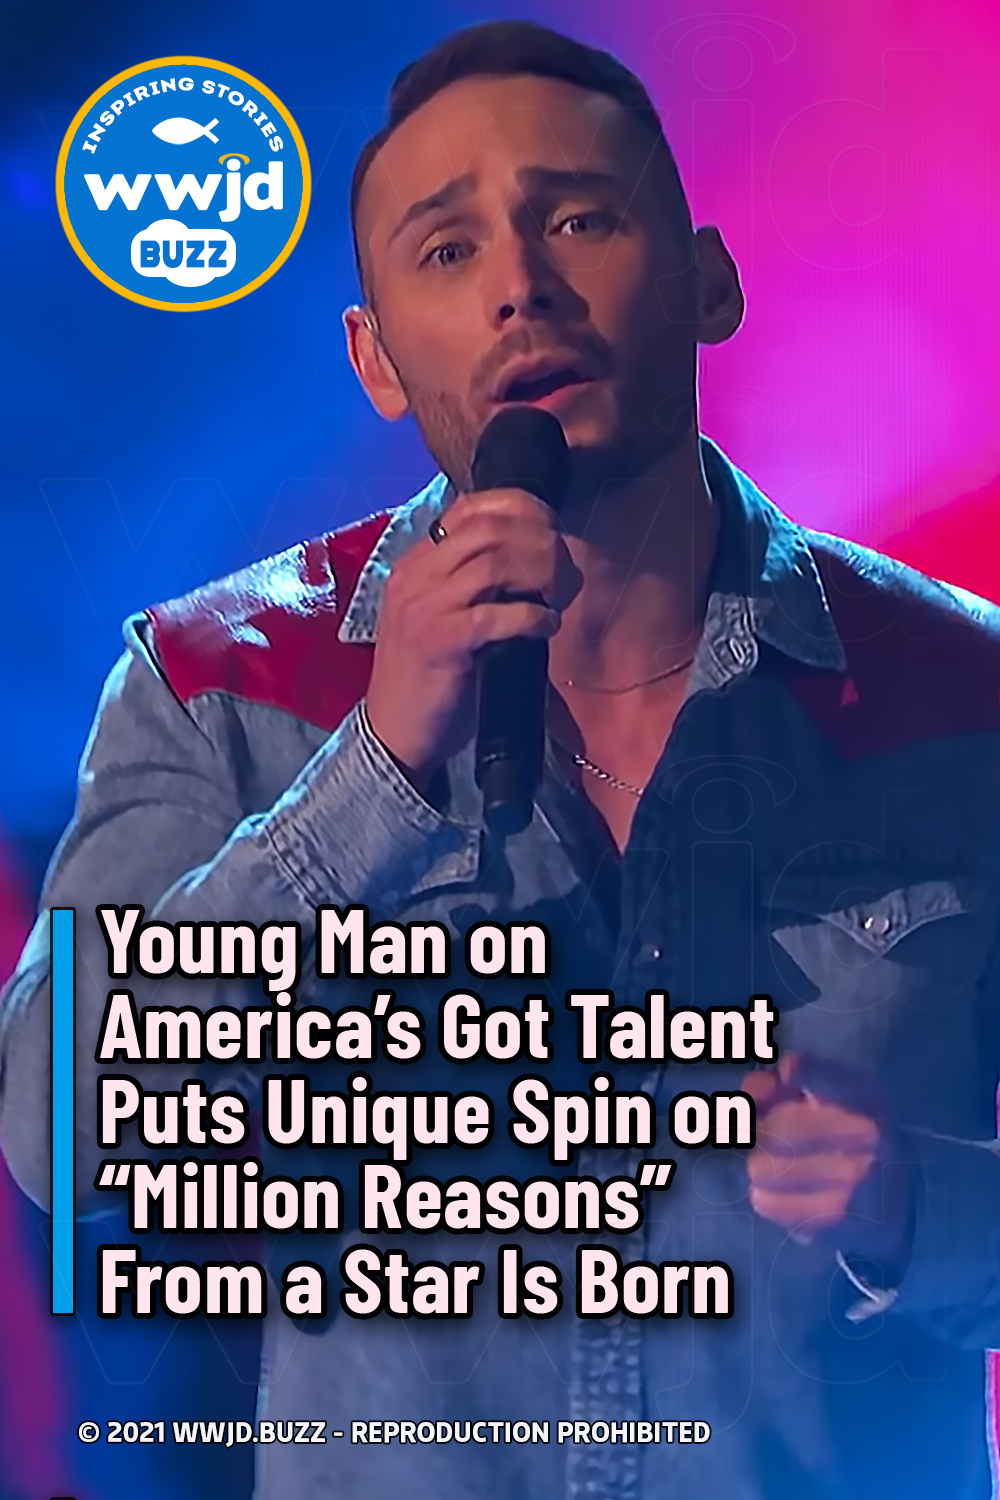 Young Man on America’s Got Talent Puts Unique Spin on “Million Reasons” From a Star Is Born